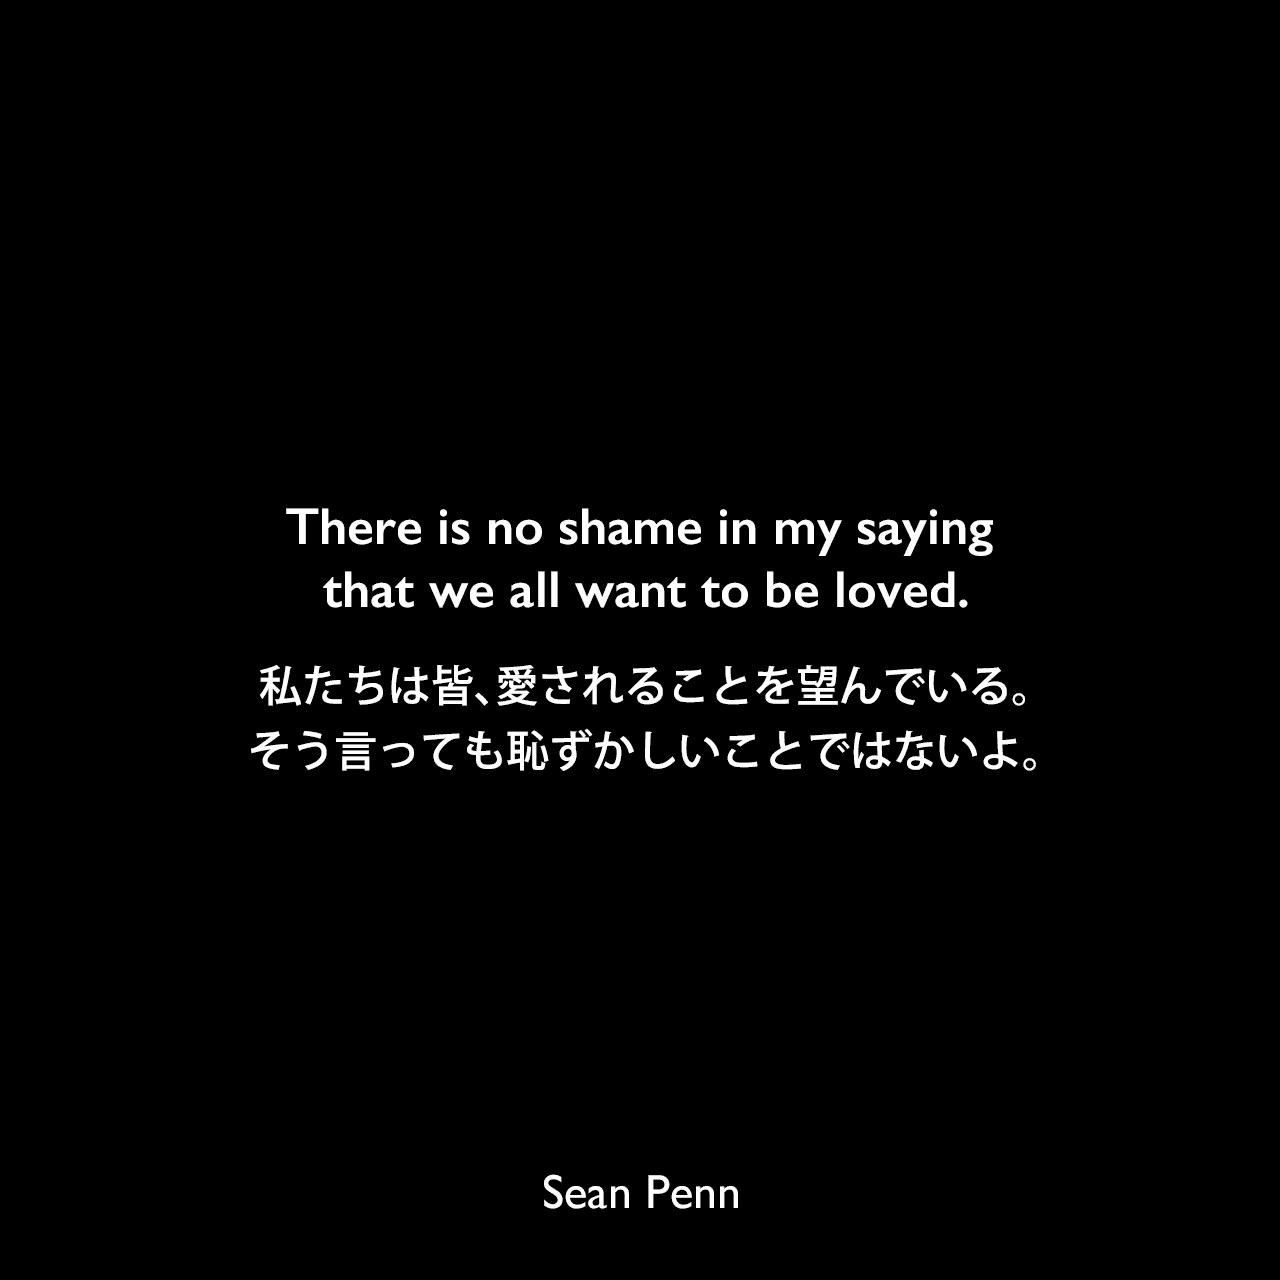 There is no shame in my saying that we all want to be loved.私たちは皆、愛されることを望んでいる。そう言っても恥ずかしいことではないよ。